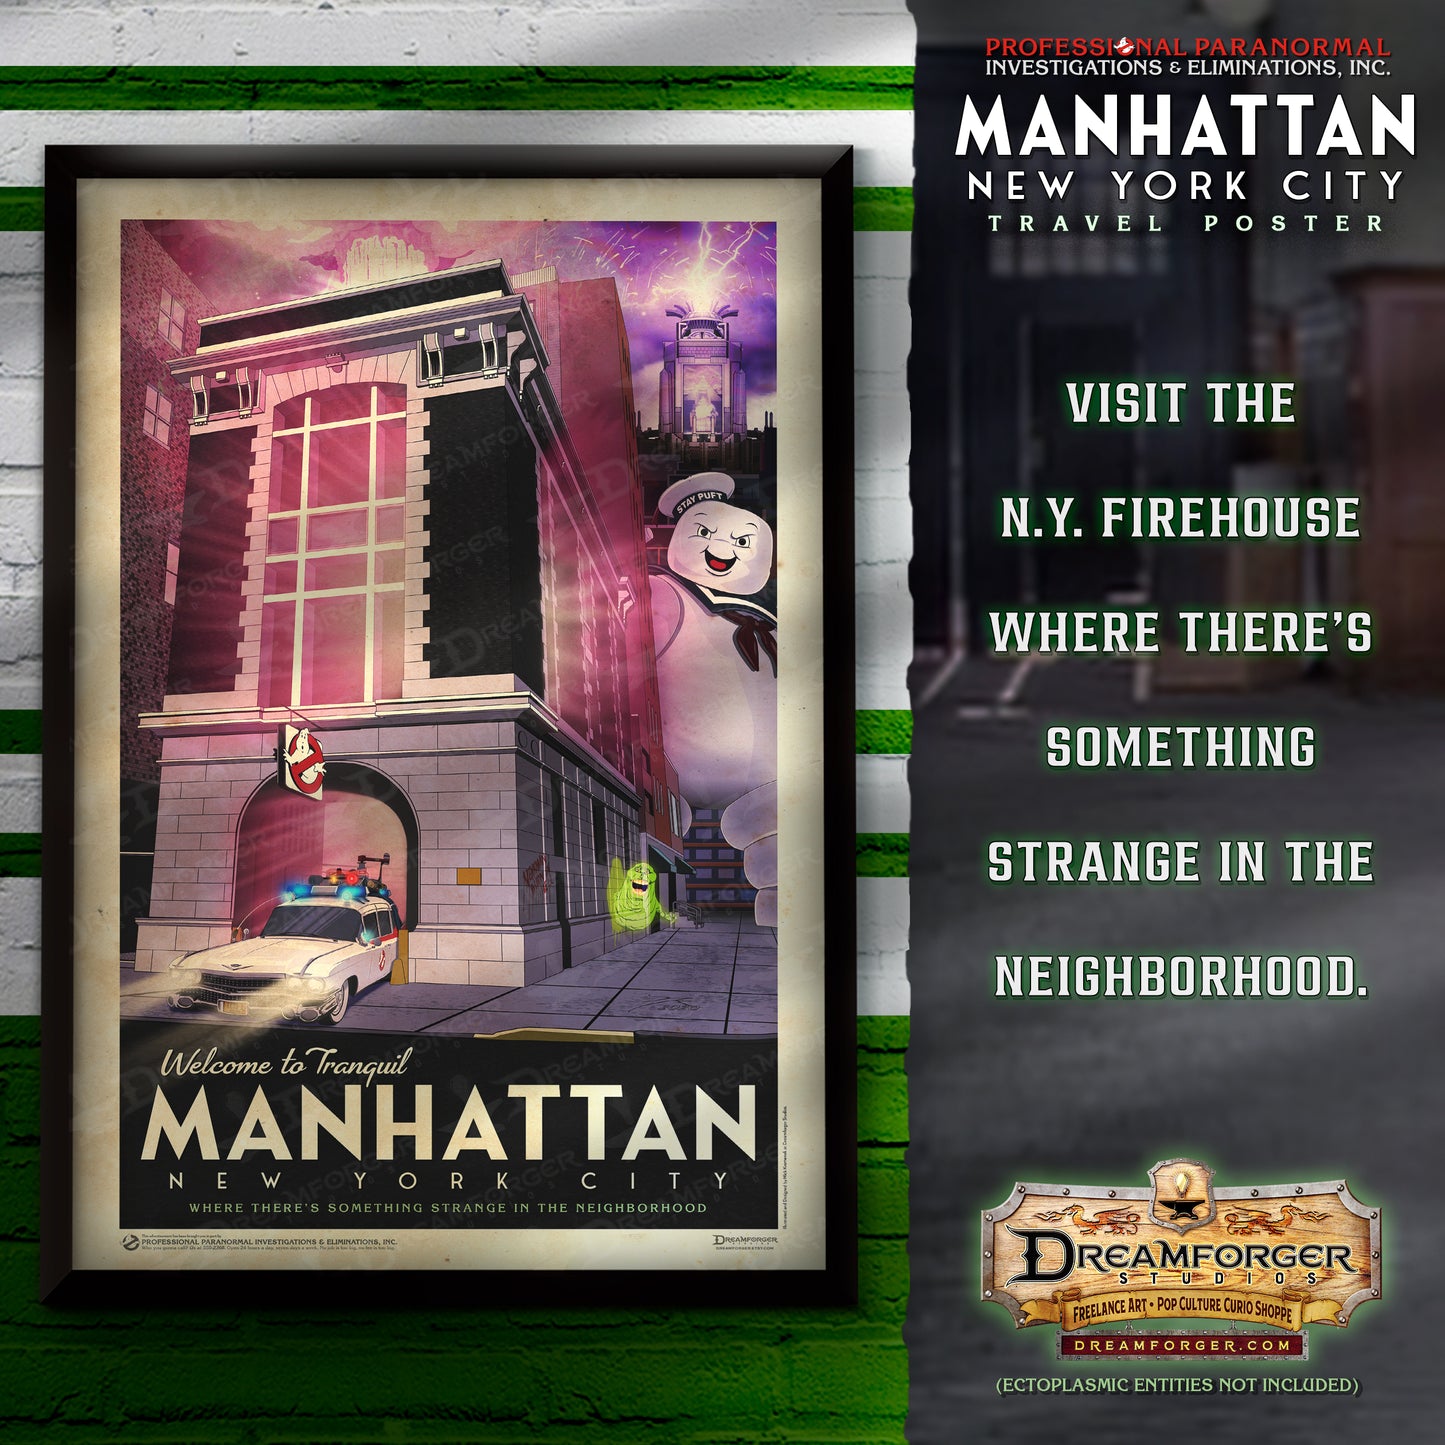 PPE&I "Welcome to Tranquil Manhattan" Travel Poster